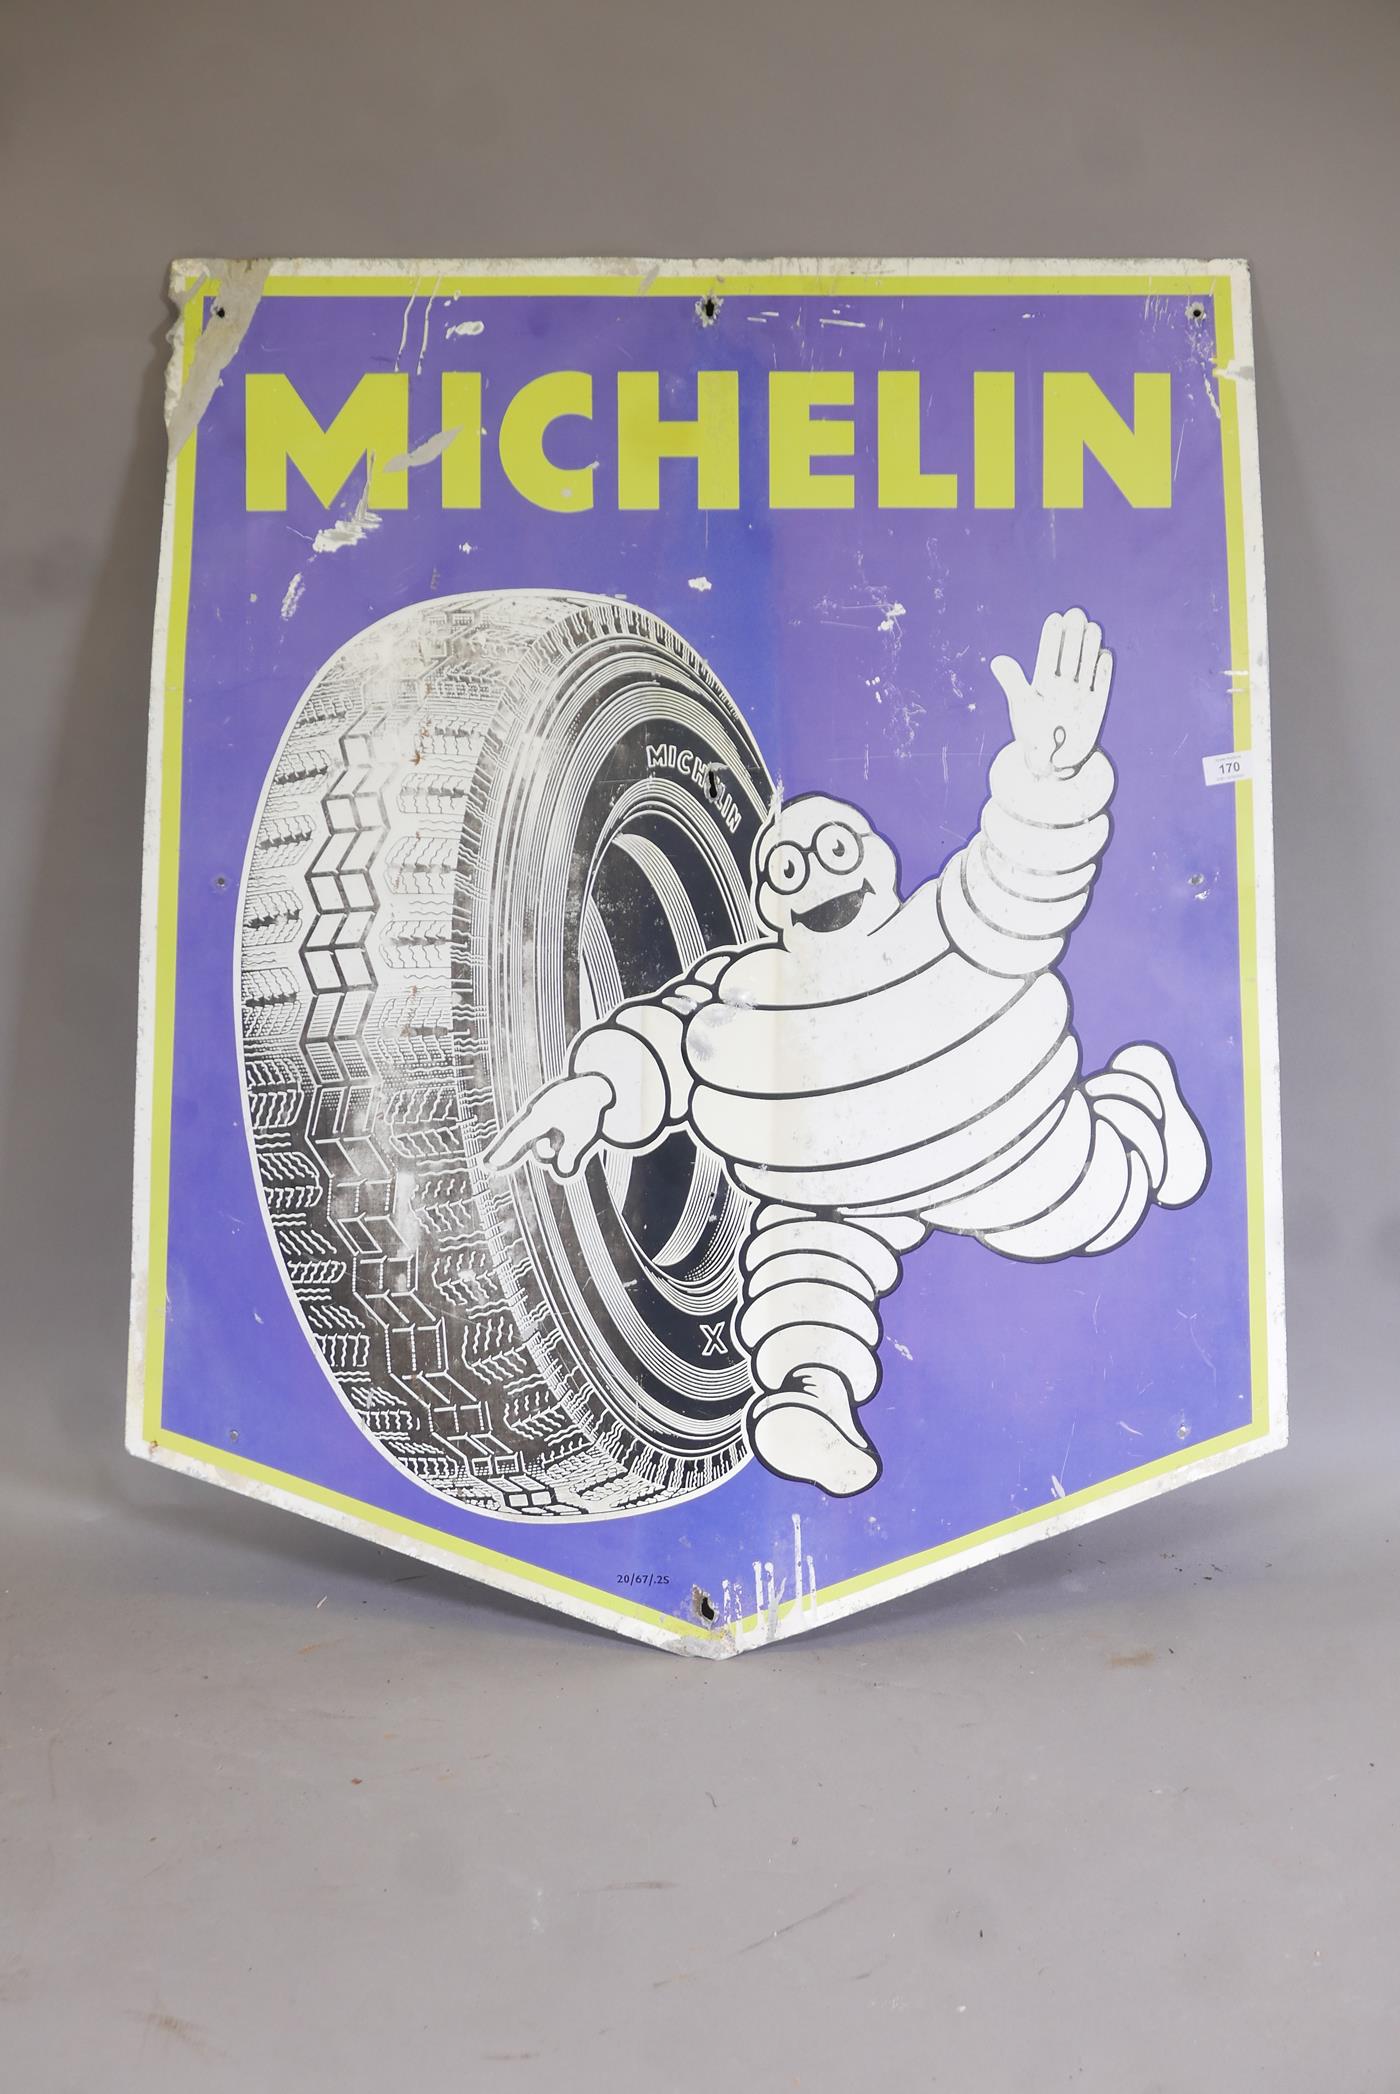 A mid C20th Michelin Tyres enamel advertising sign, 33½" x 43"